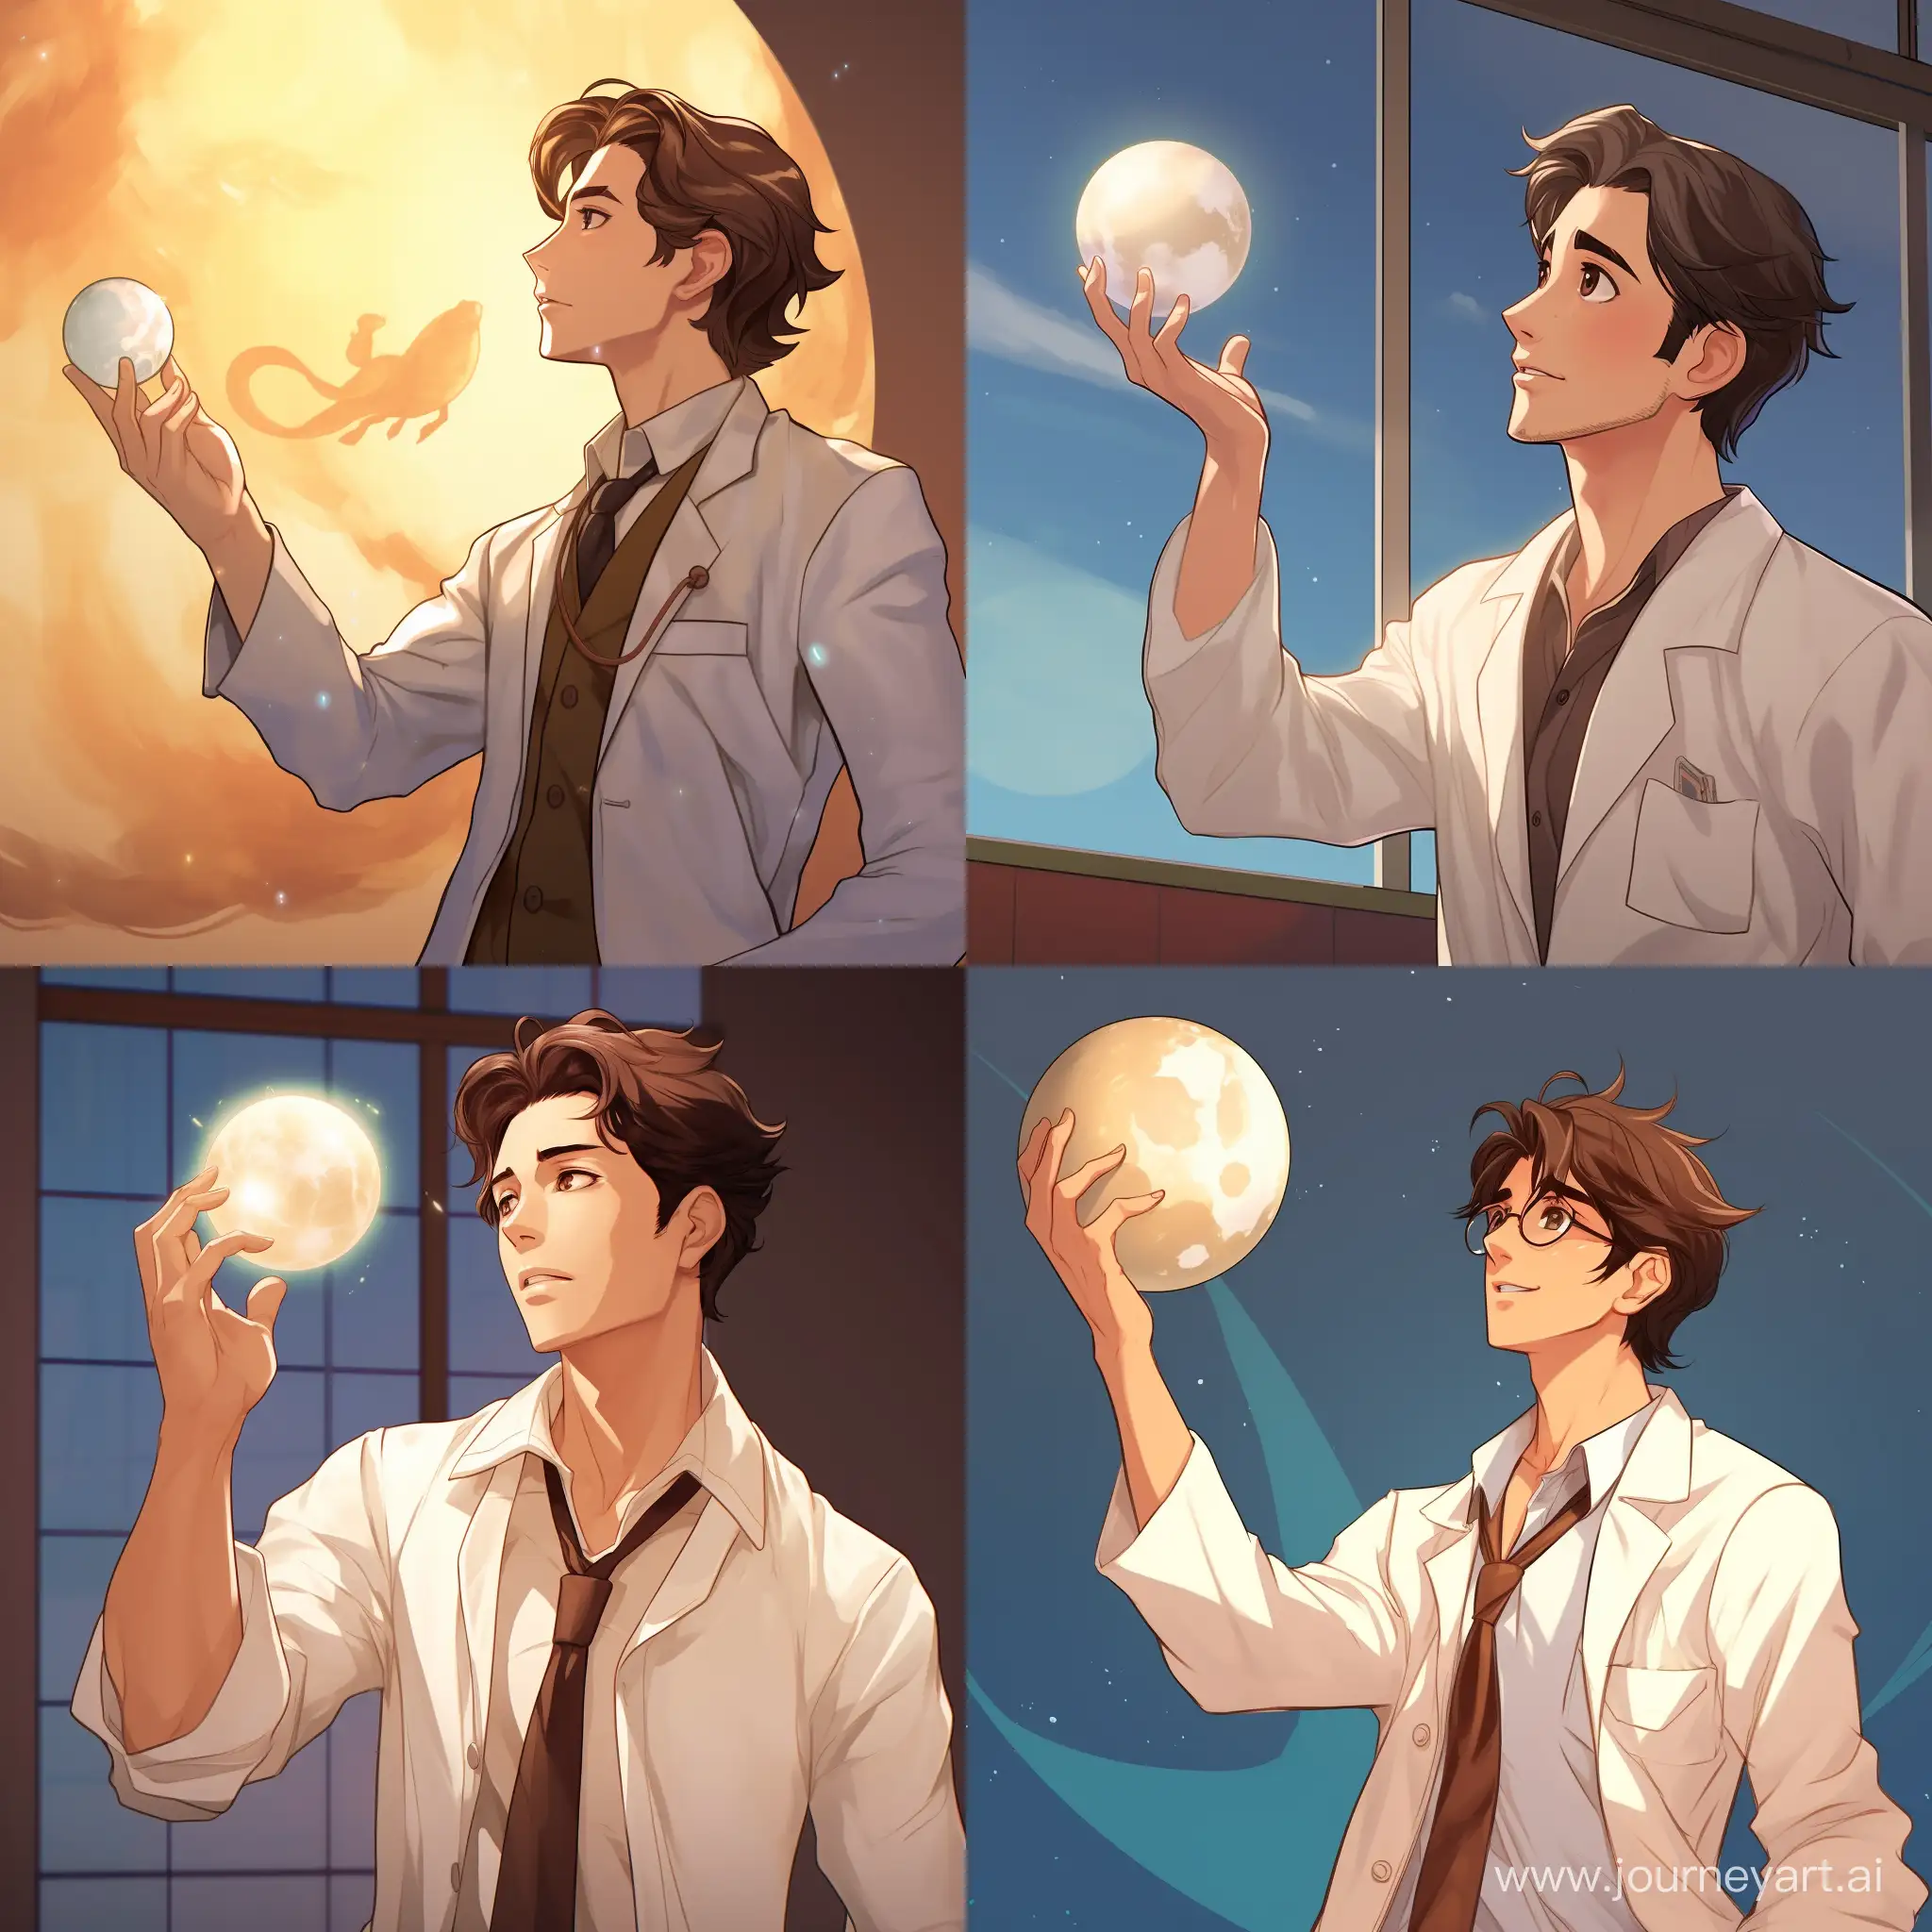 Anime-Scientist-Contemplating-Levitating-Orb-in-Lab-Setting